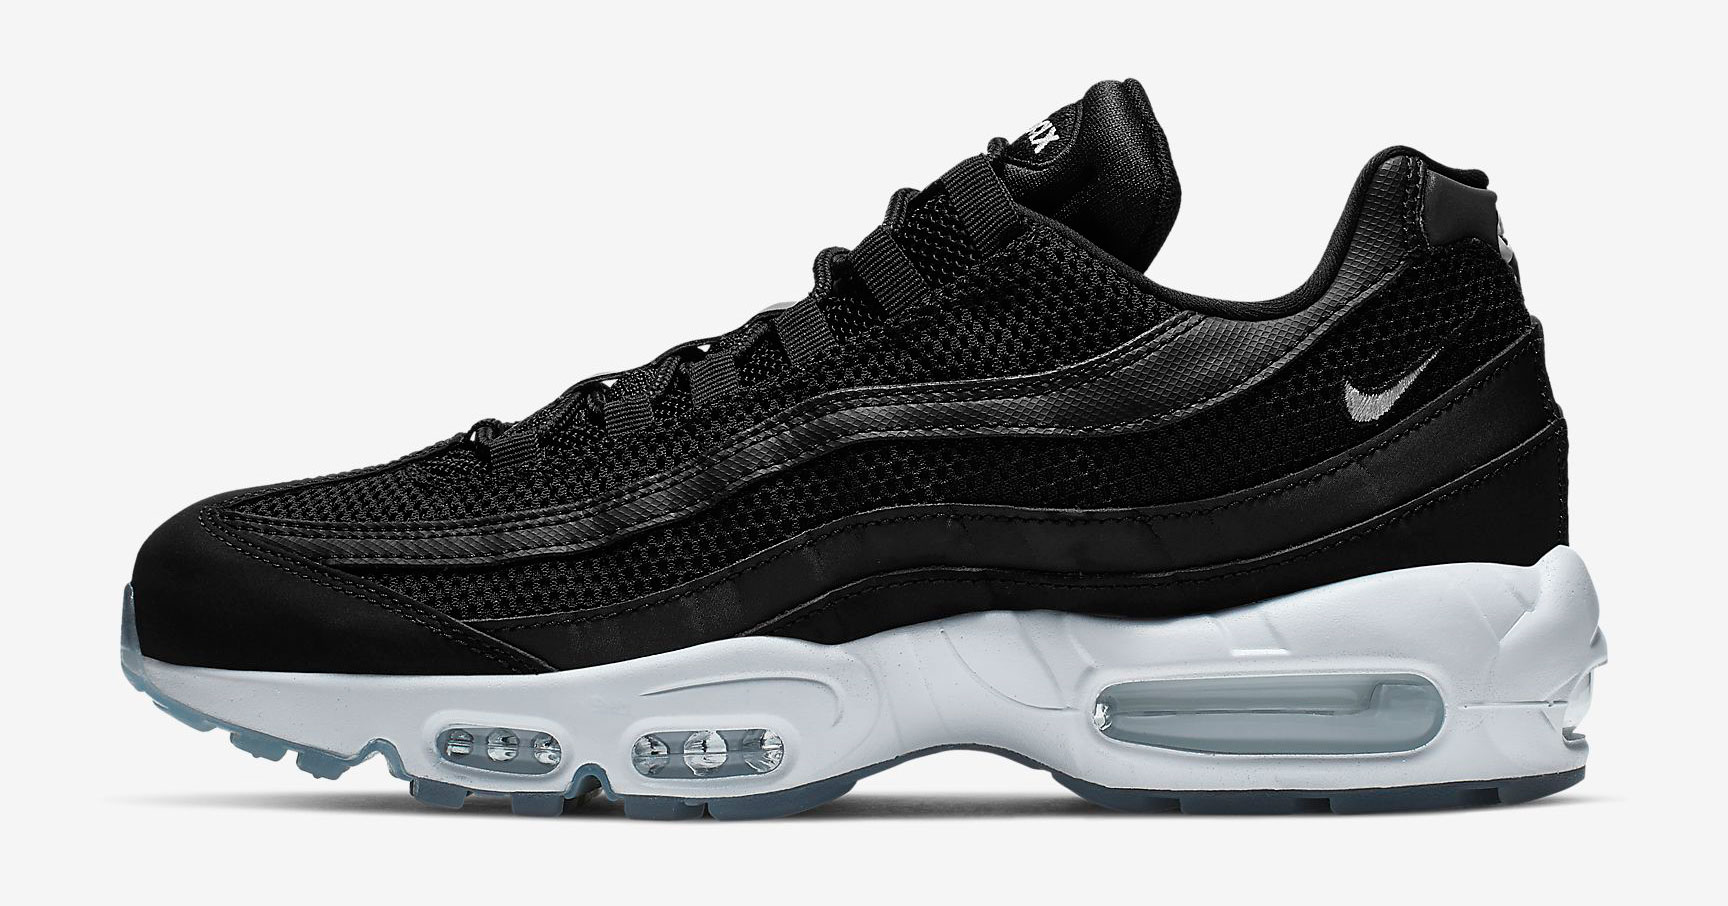 nike-air-max-95-black-white-platinum-release-date-where-to-buy